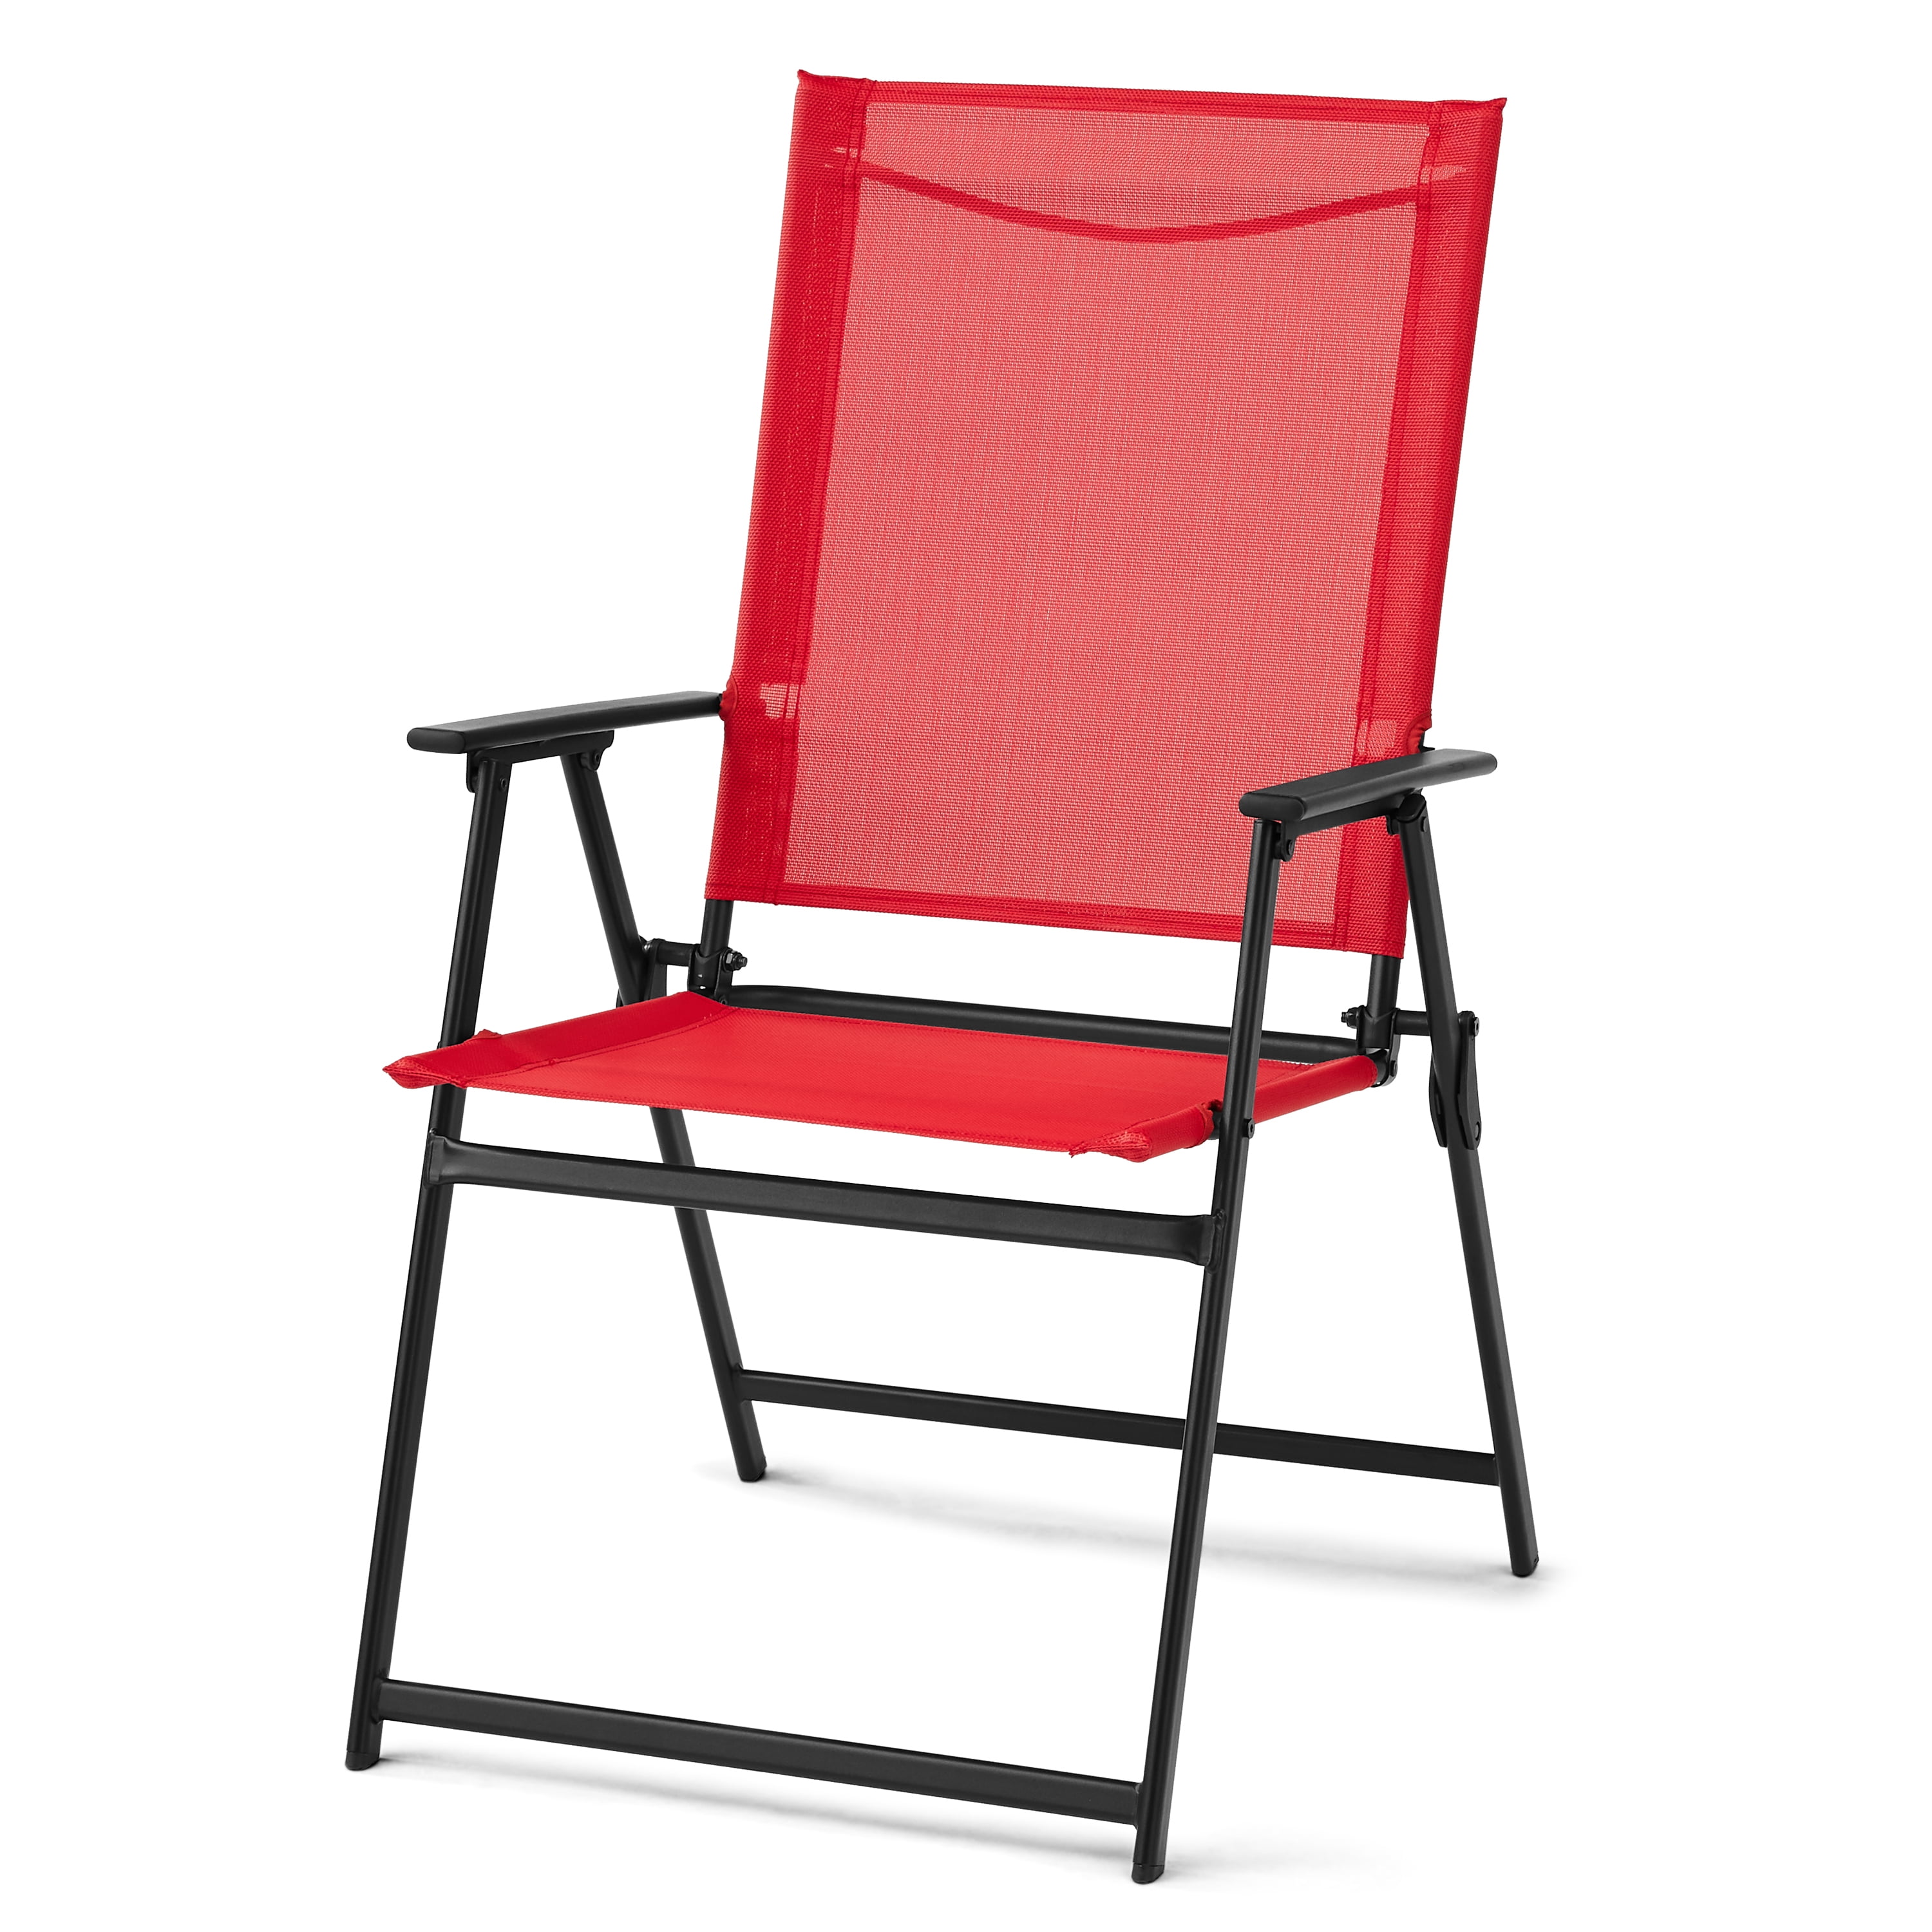 Mainstays Greyson Square Outdoor Patio, Red And Black Folding Patio Chairs